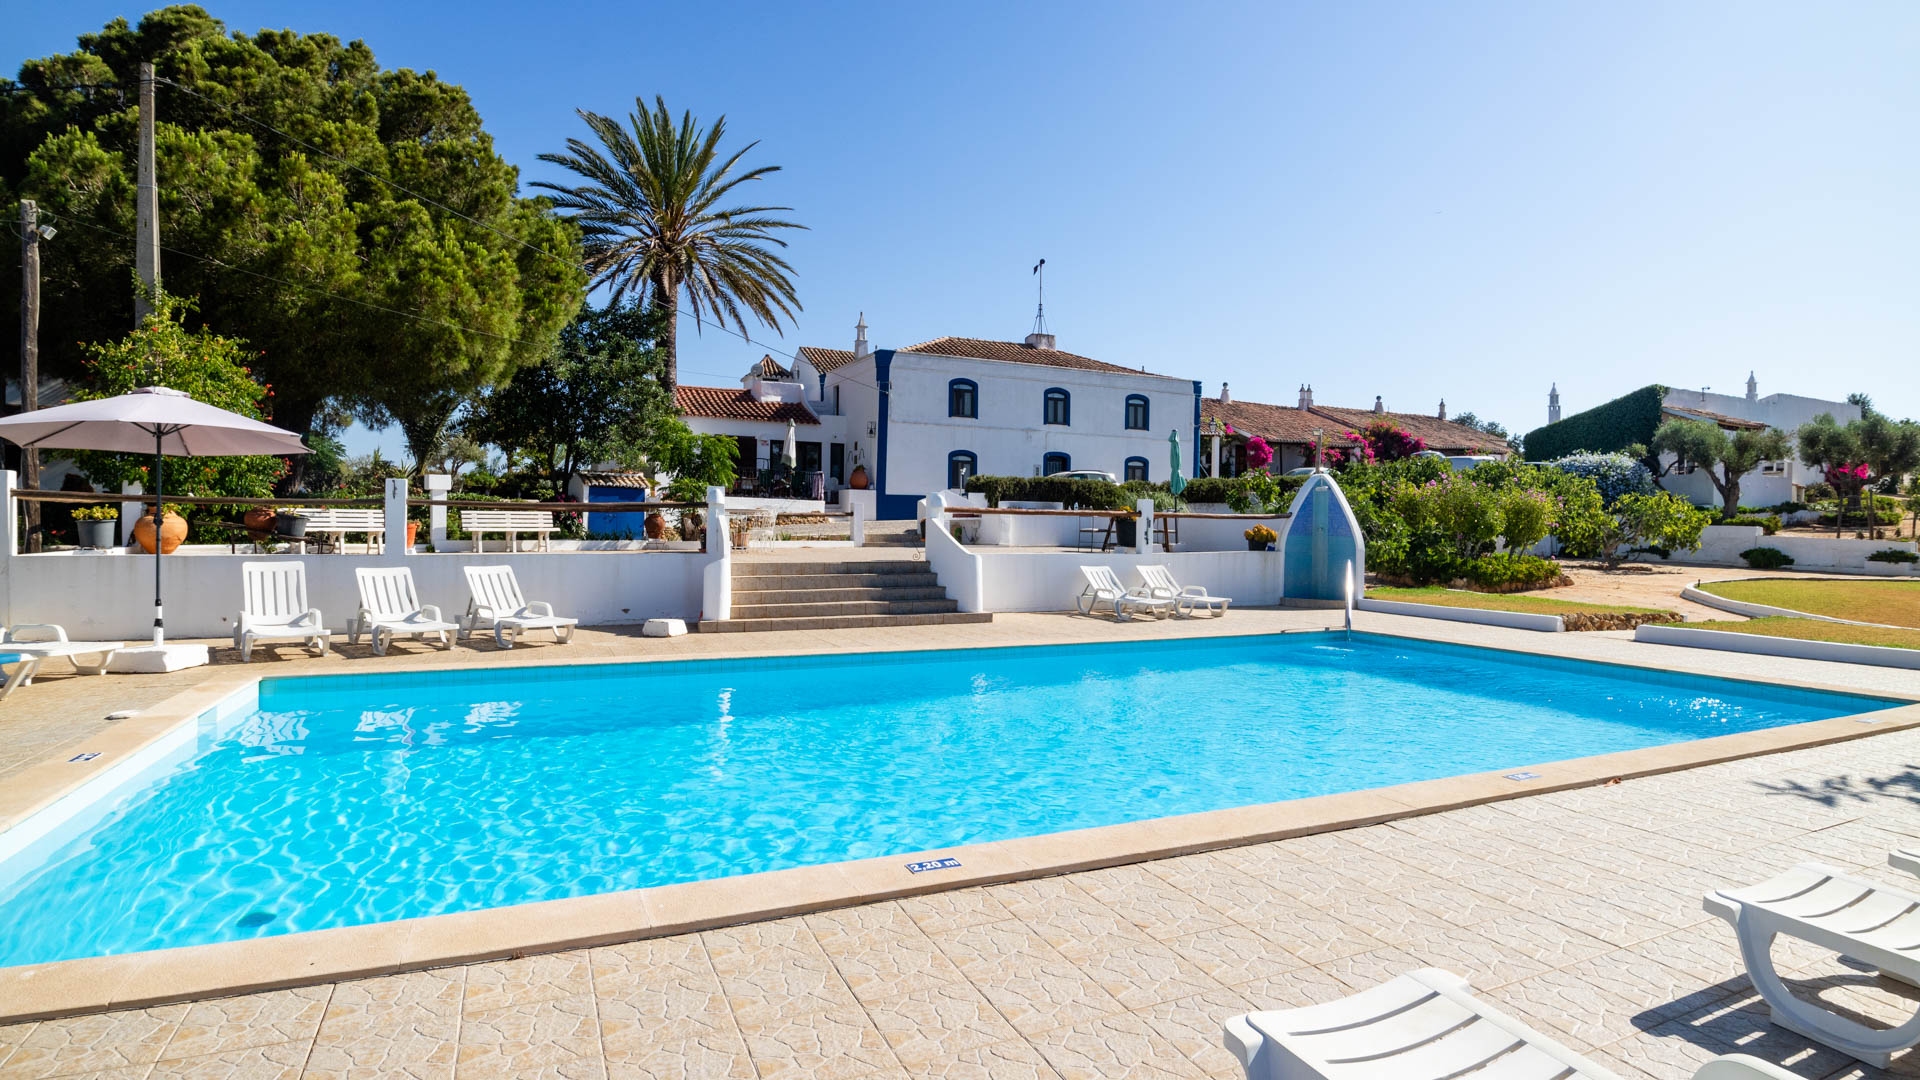 15 Bedroom Quinta with 11 Apartments and a Lagar, Guia | VM1986 Located in Guia, Albufeira, this Quinta with 11 separate apartments, pool and a big plot of land is a great opportunity for holiday rentals or possibly a farm. 